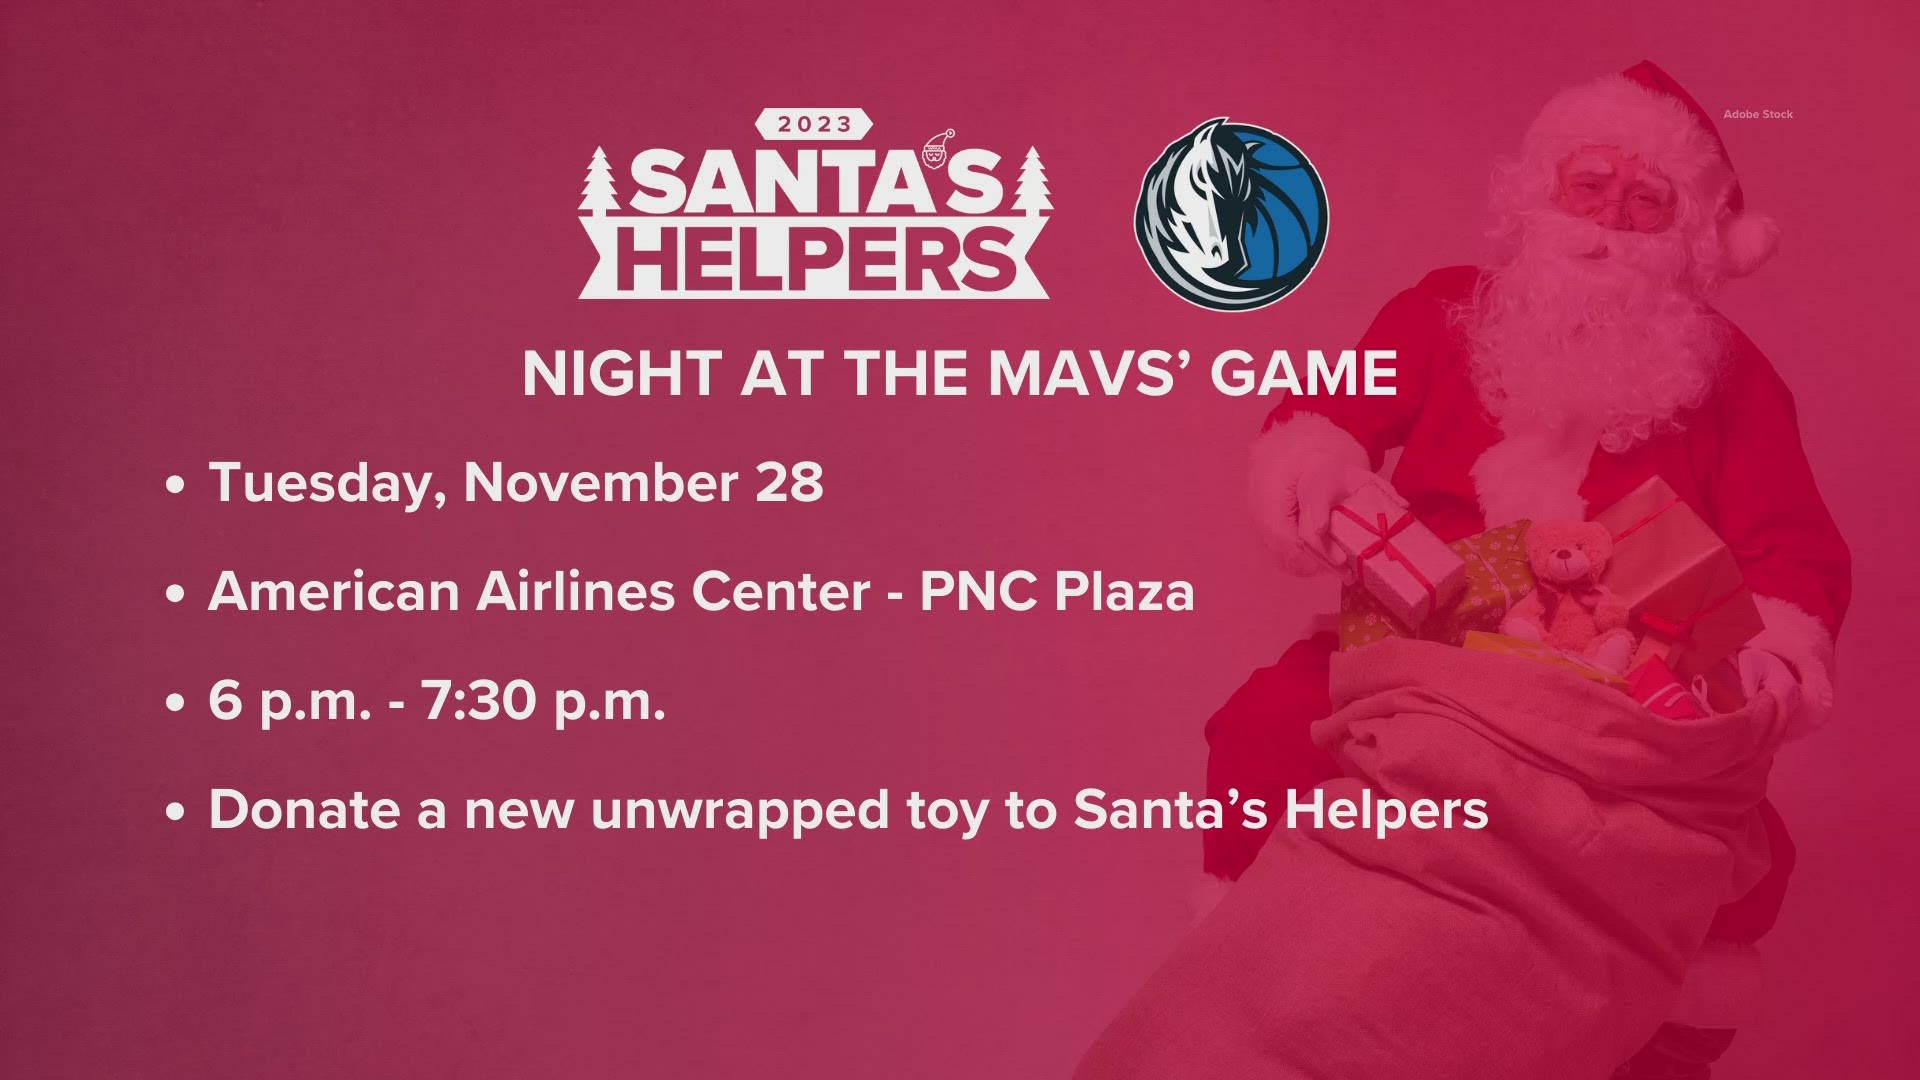 Fans can bring new, unwrapped toys to PNC Plaza outside of the AAC ahead of the Mavs' home game against Houston on Nov. 28.